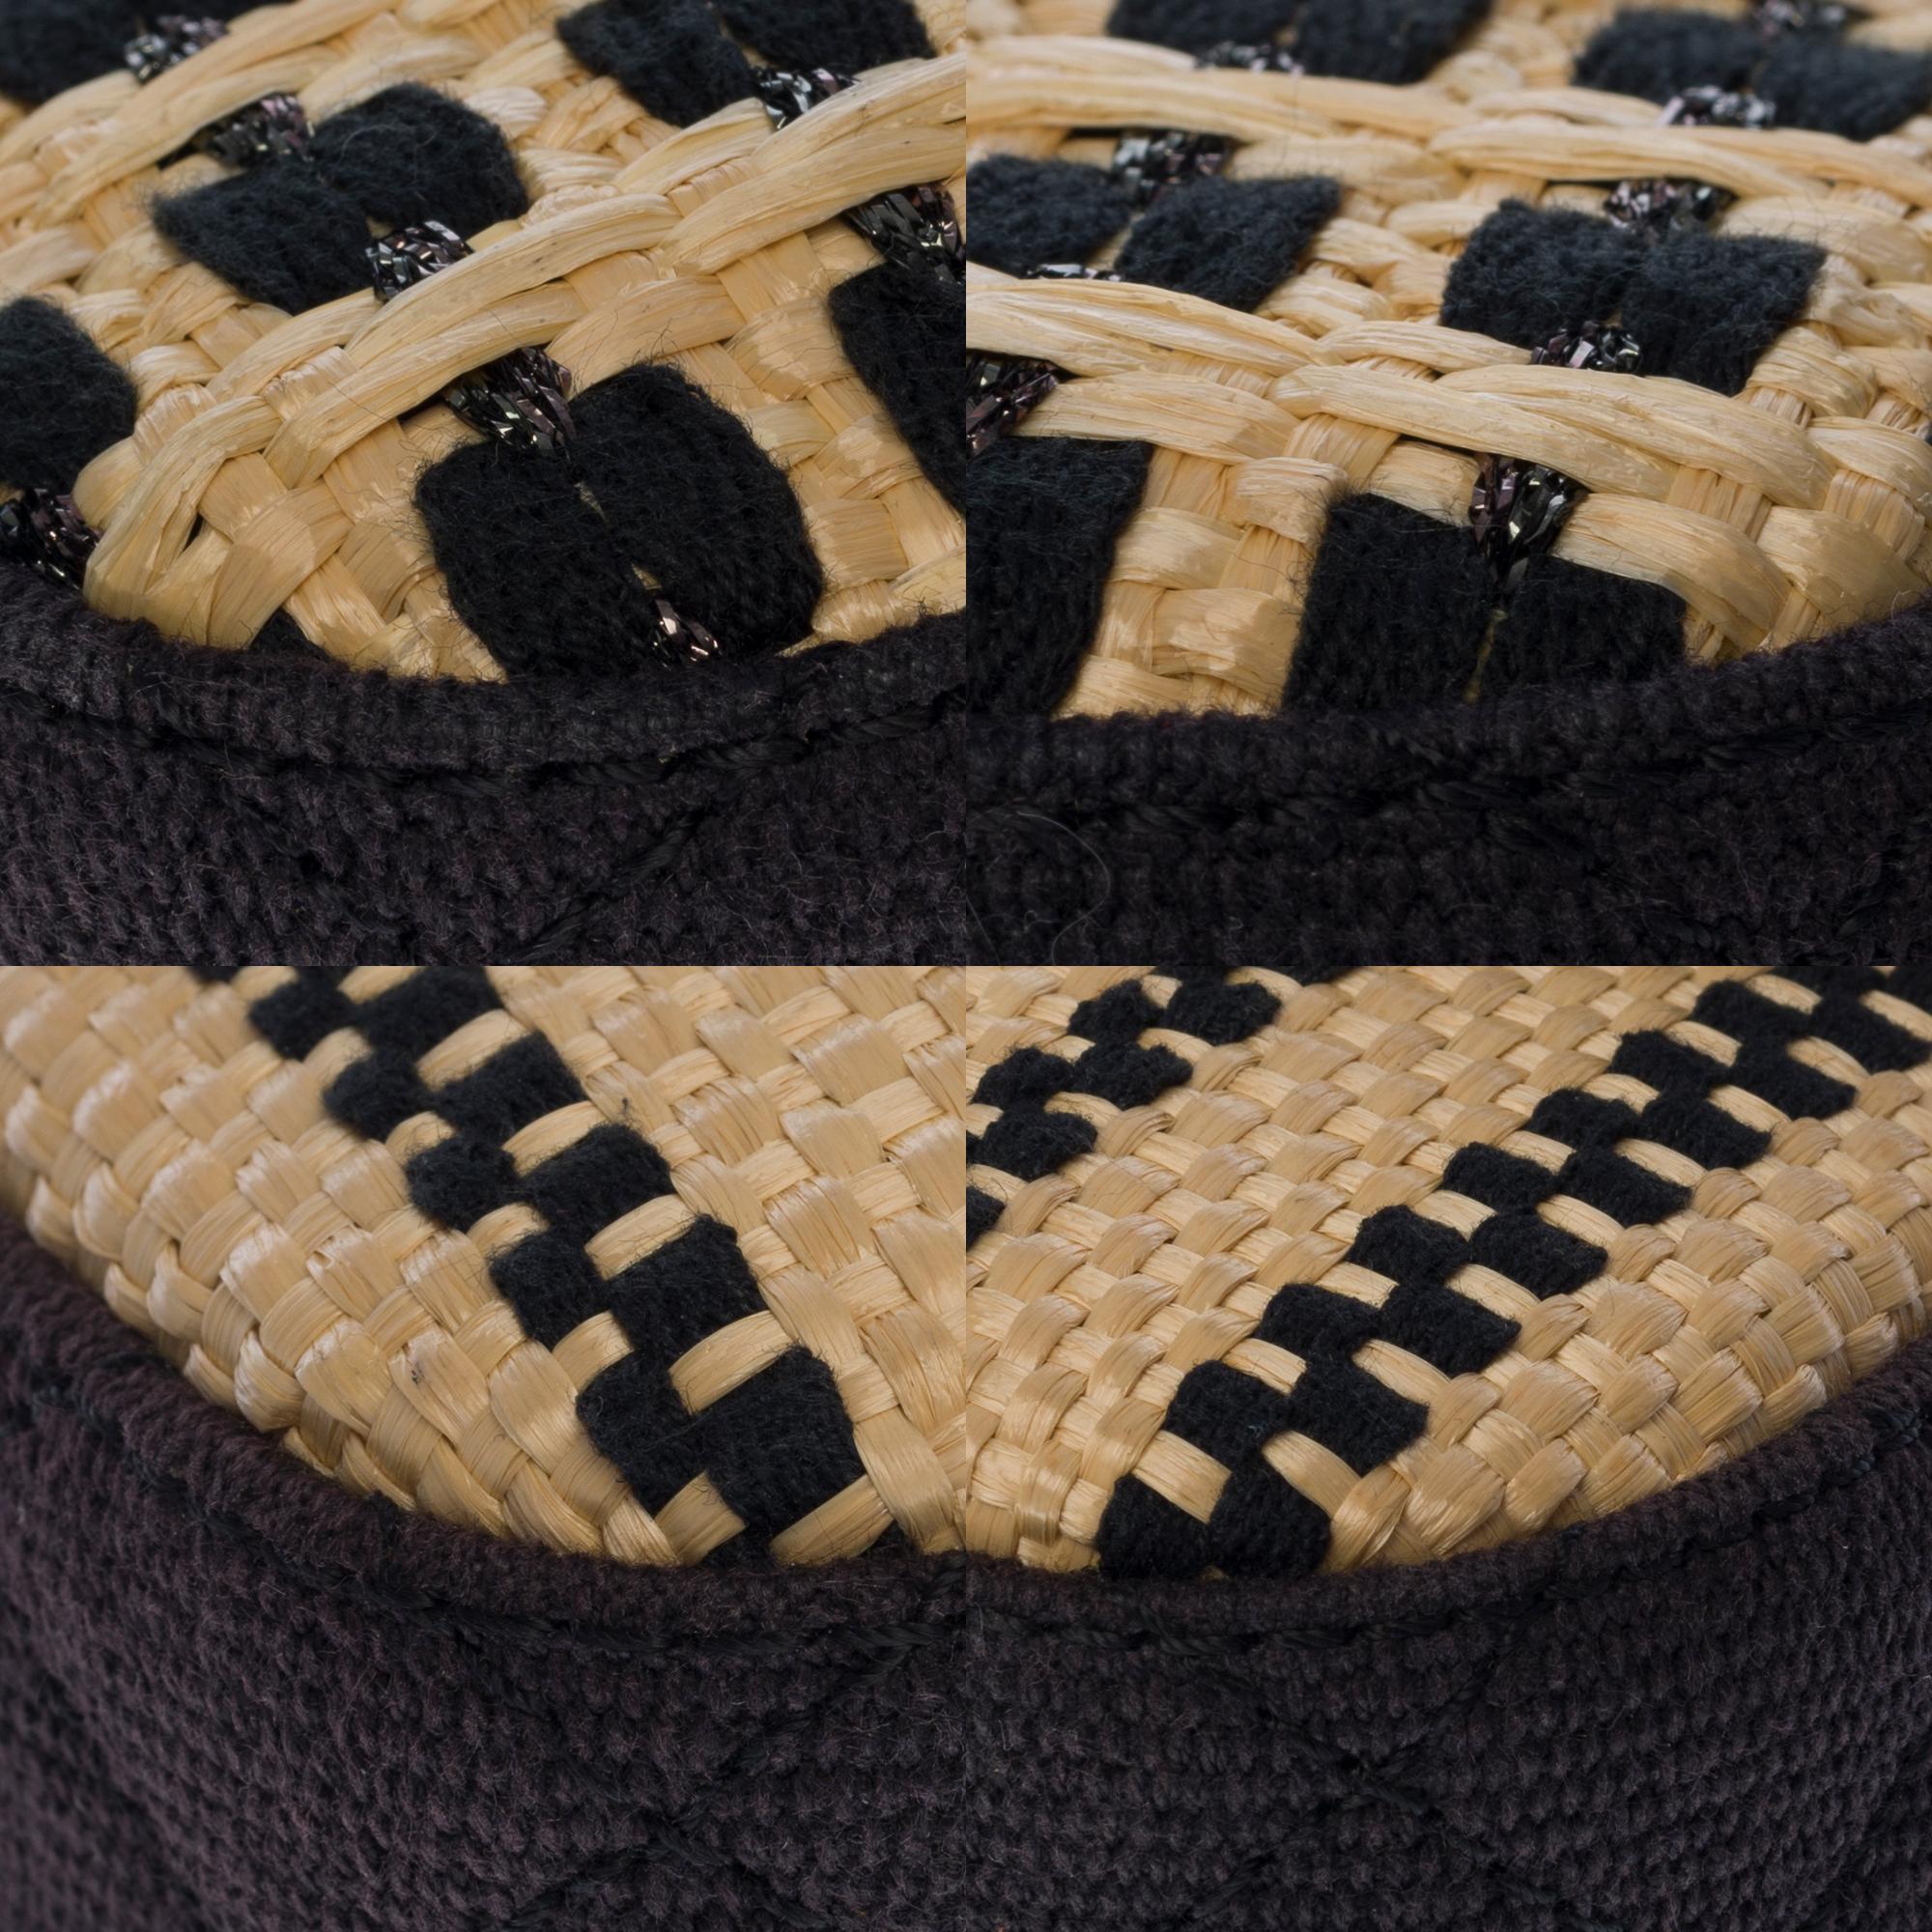 Limited Edition/Chanel 2.55 shoulder bag in Raffia and navy blue canvas, SHW 2